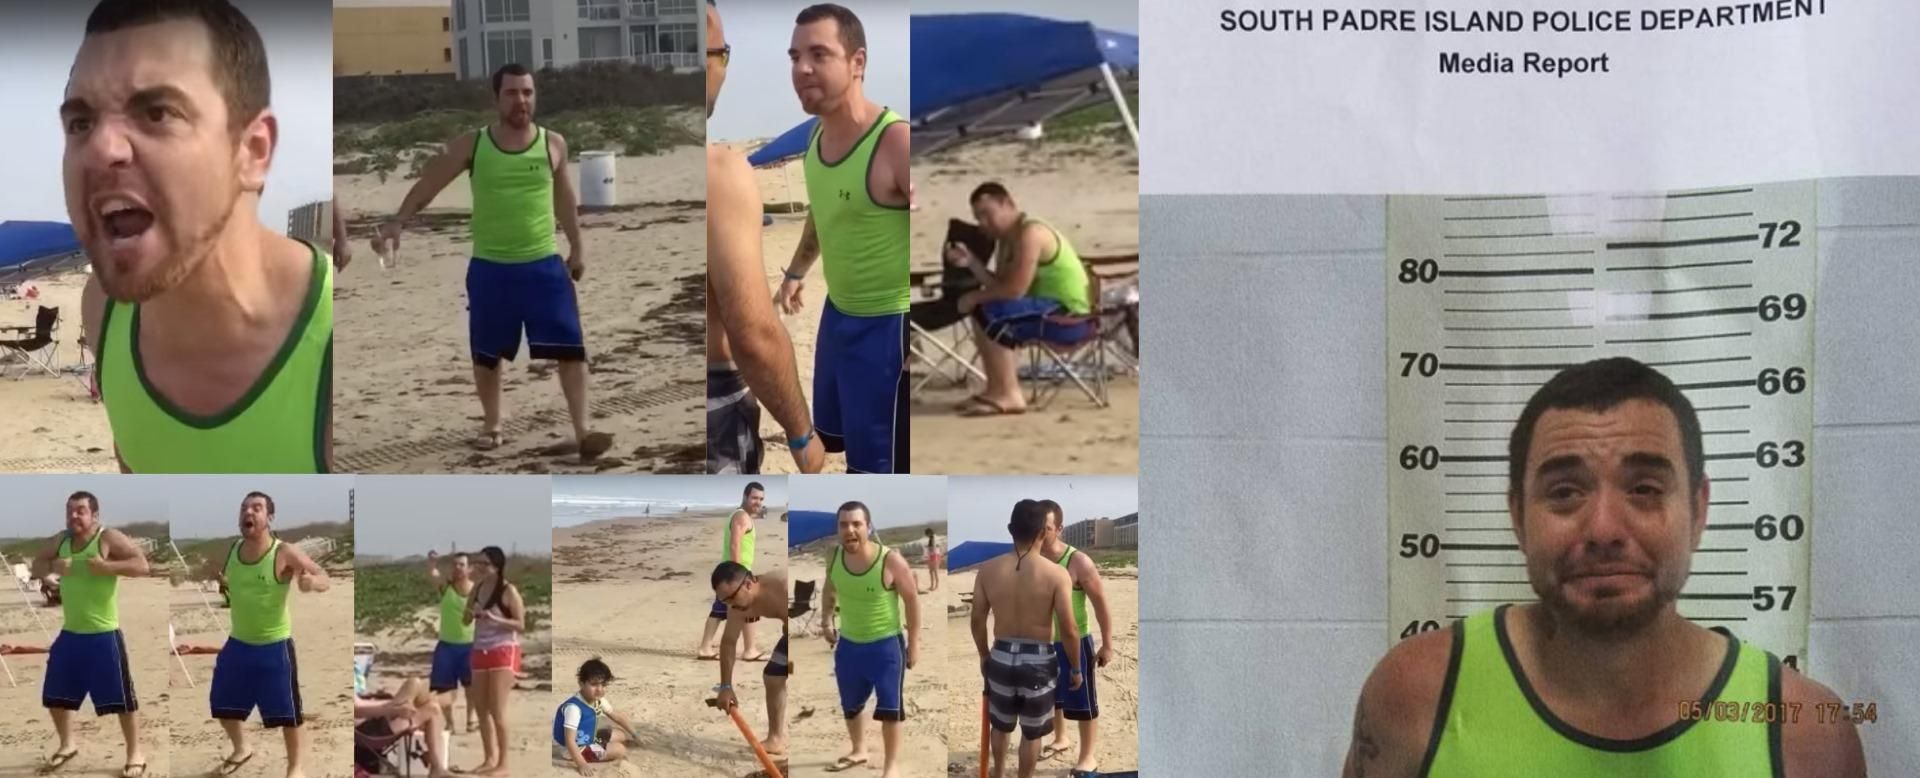 Drunk gangster wannabee verbally attacks family at the beach, ends up crying on his mugshot